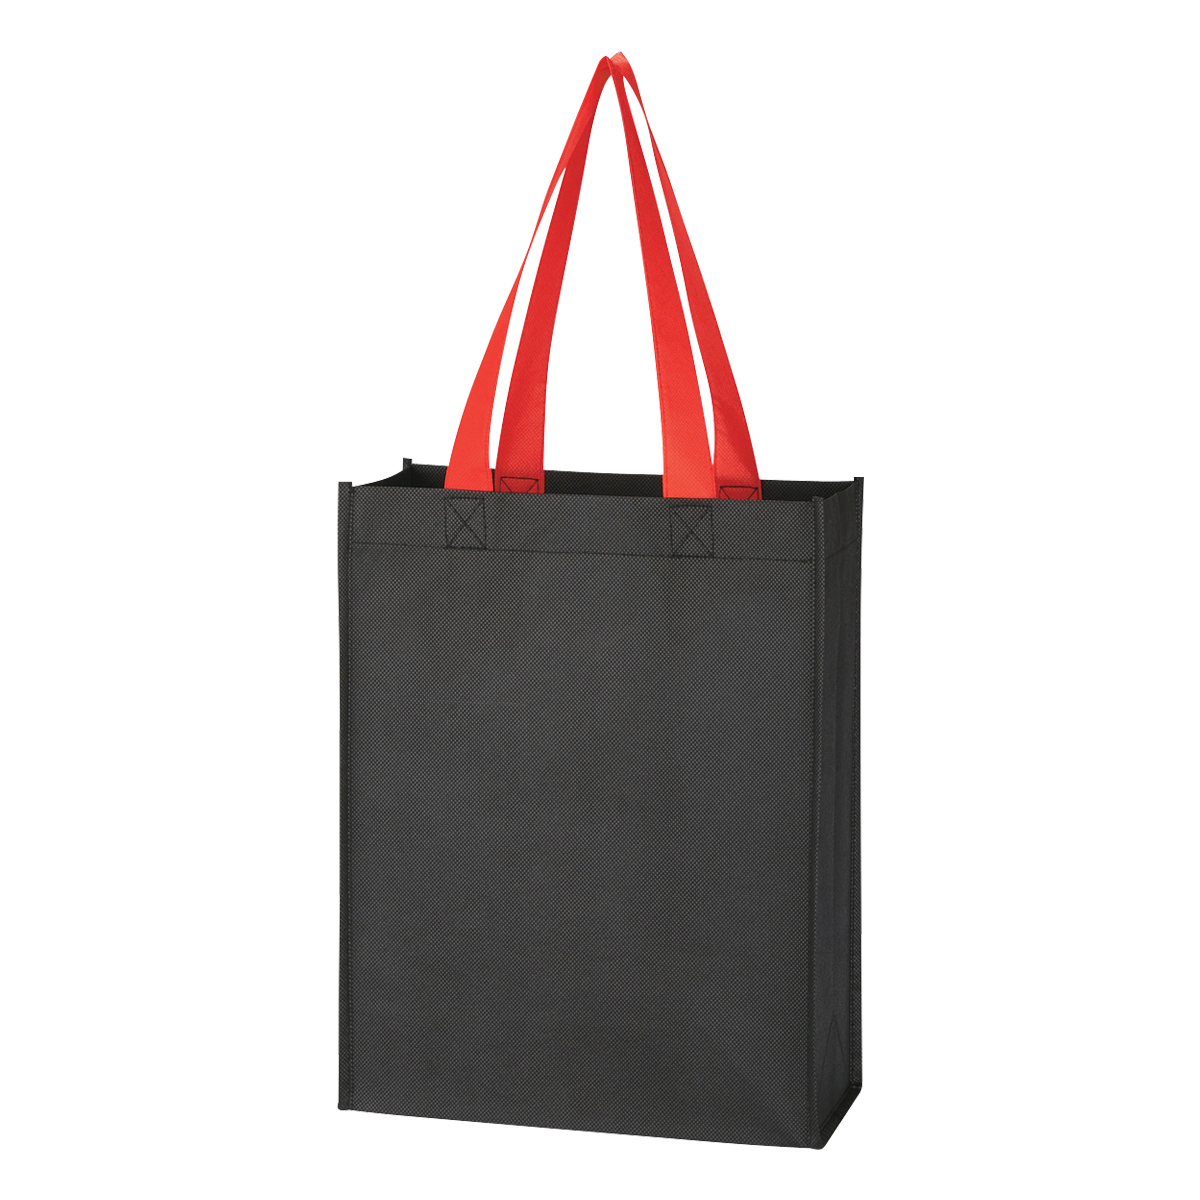 nwtb3325_black_with_red_handle